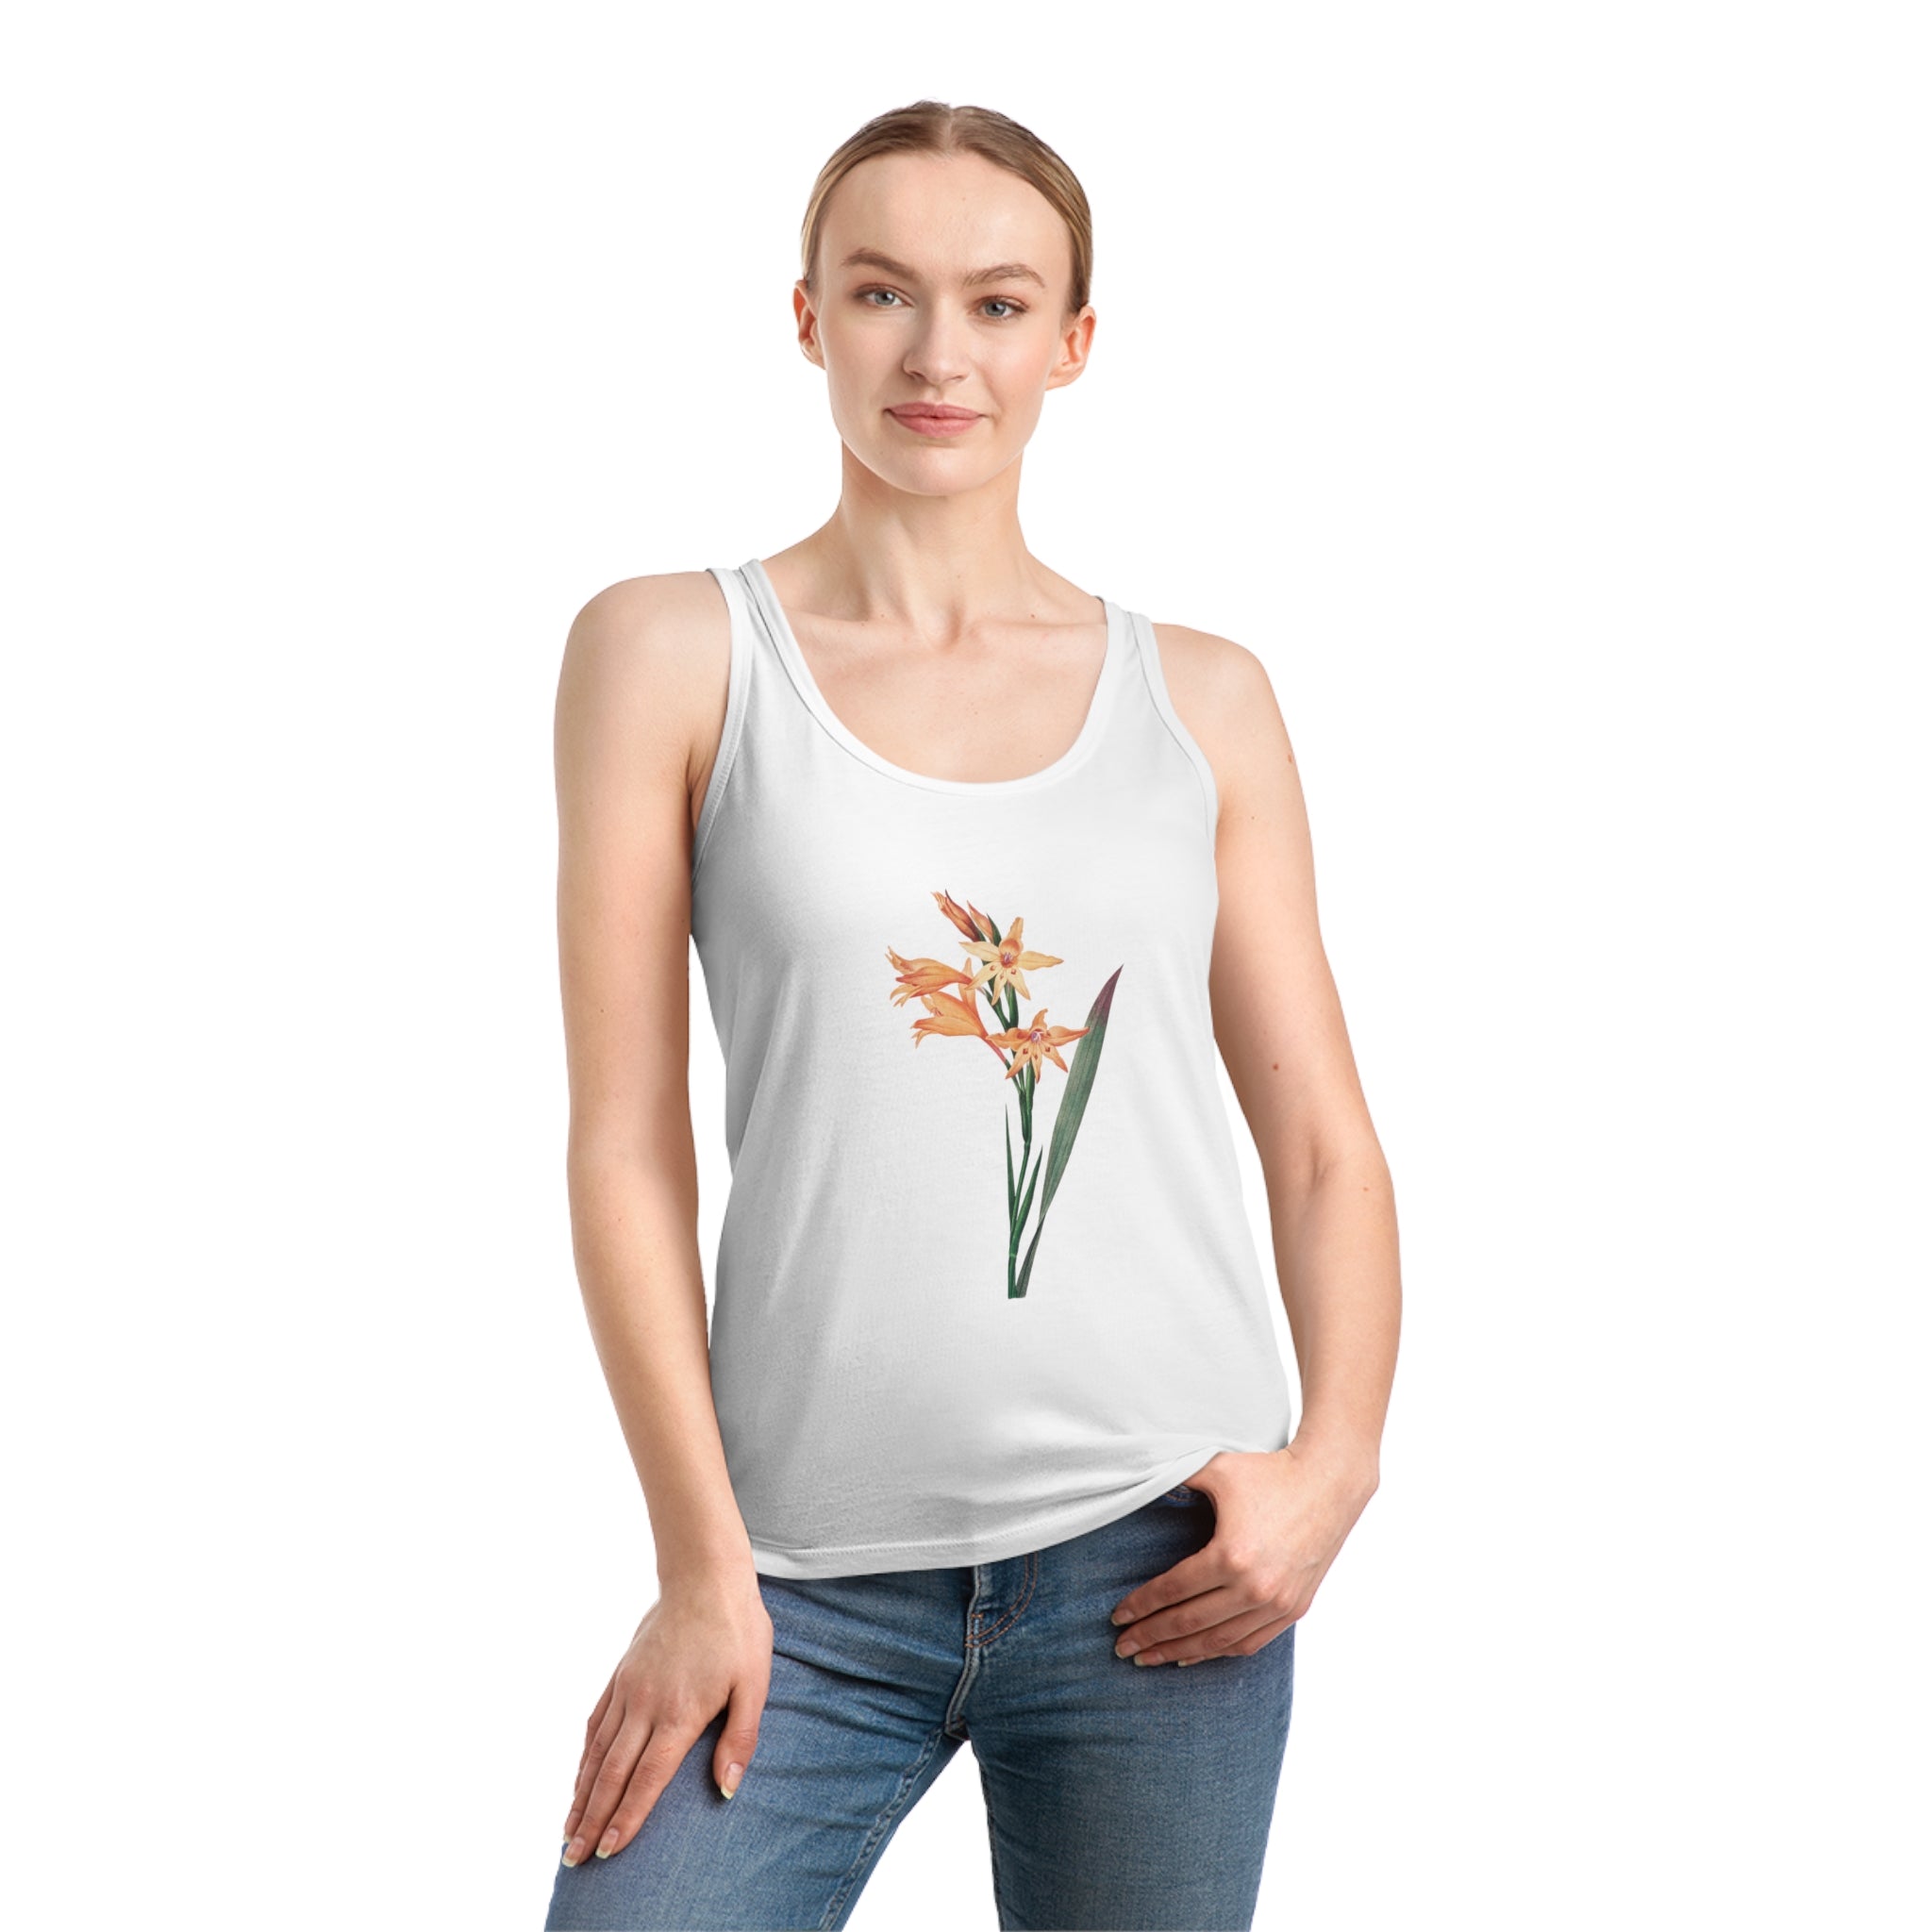 This Flowers Tank Top is made of lightweight, breathable organic cotton fabric and features a vibrant orange flower design.